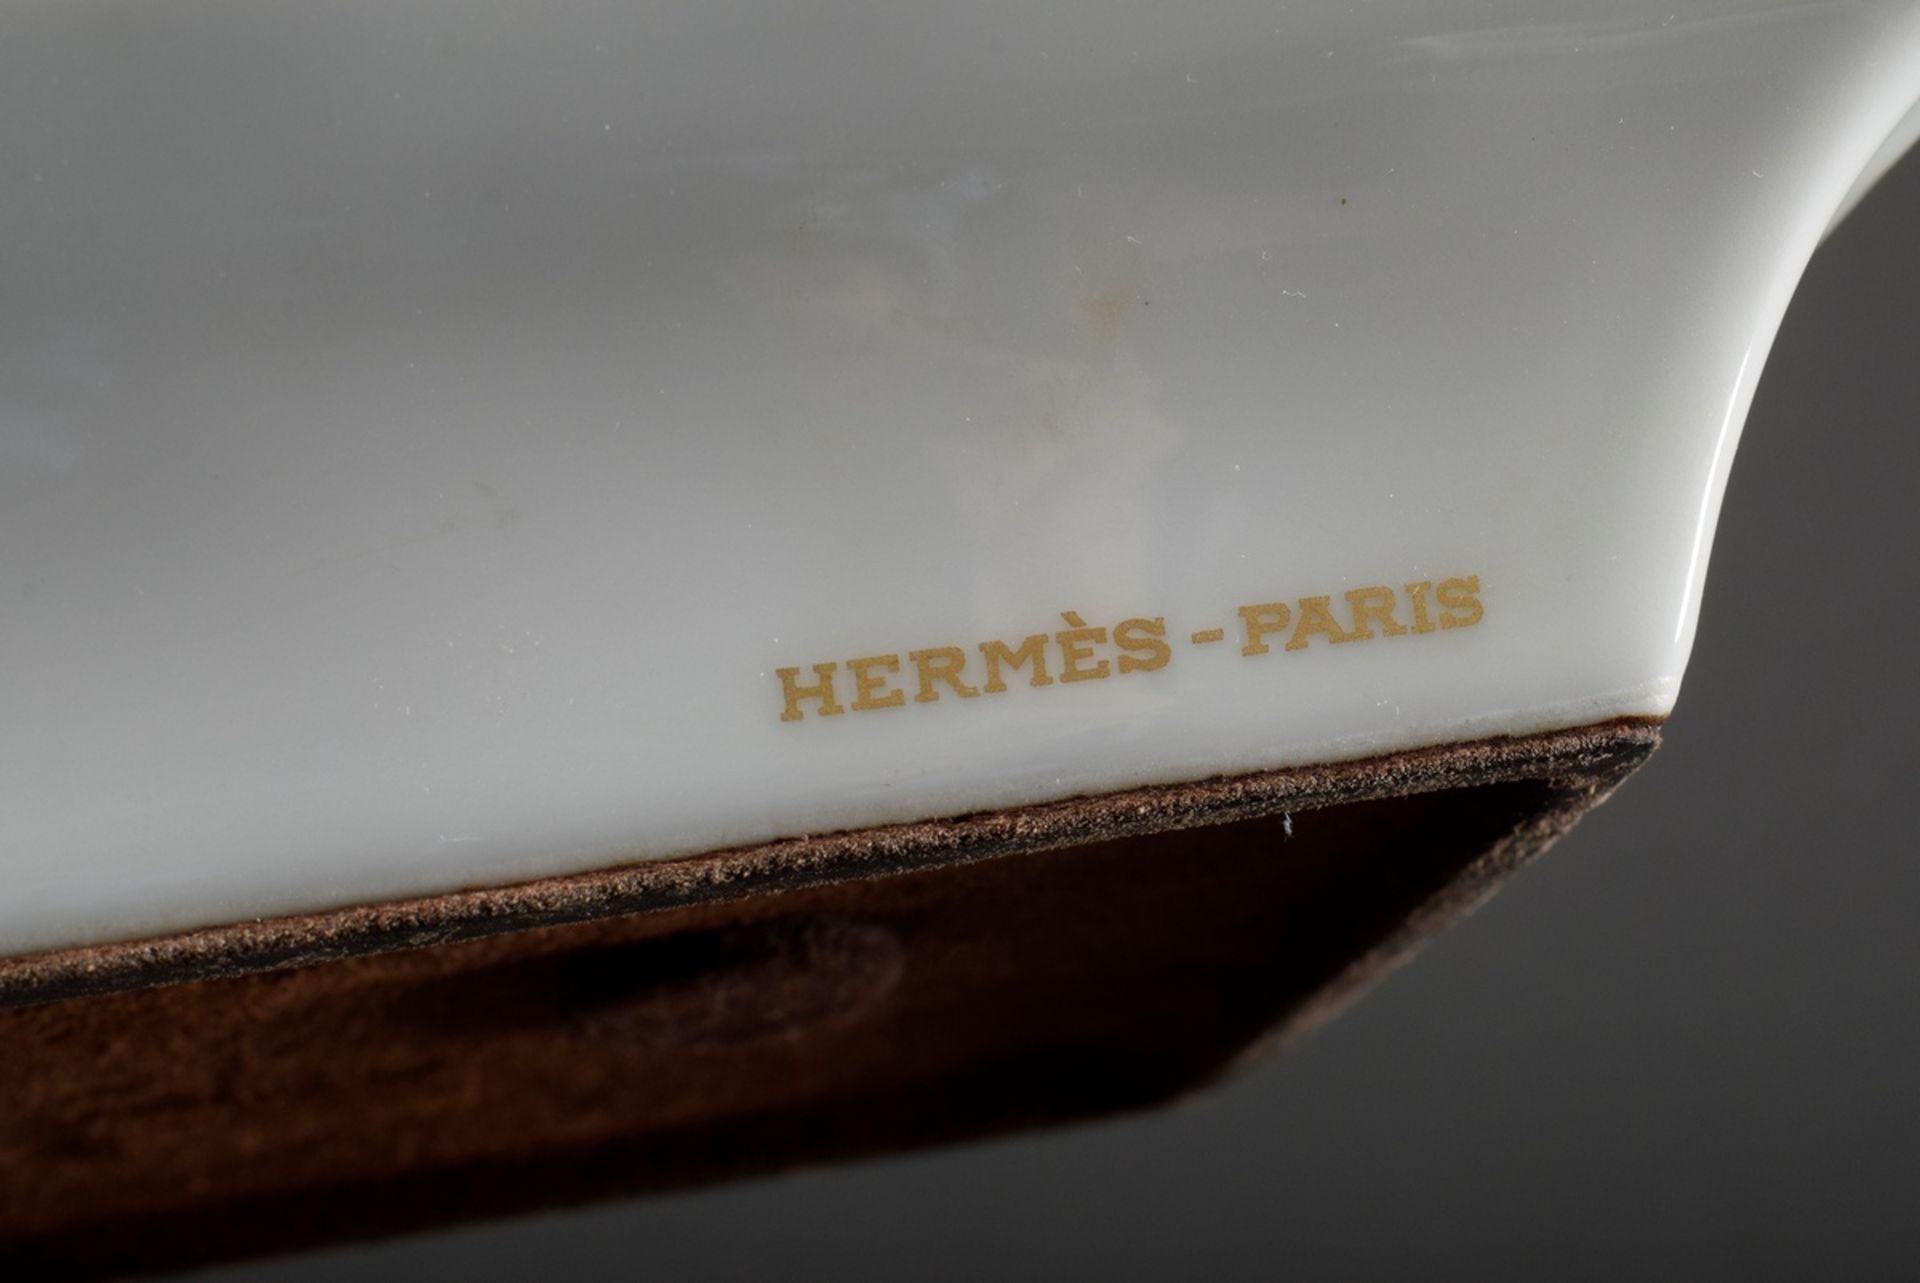 Hermès porcelain ashtray "Keiler", coloured print decoration in green/brown, 19x18cm, some rubbing - Image 5 of 5